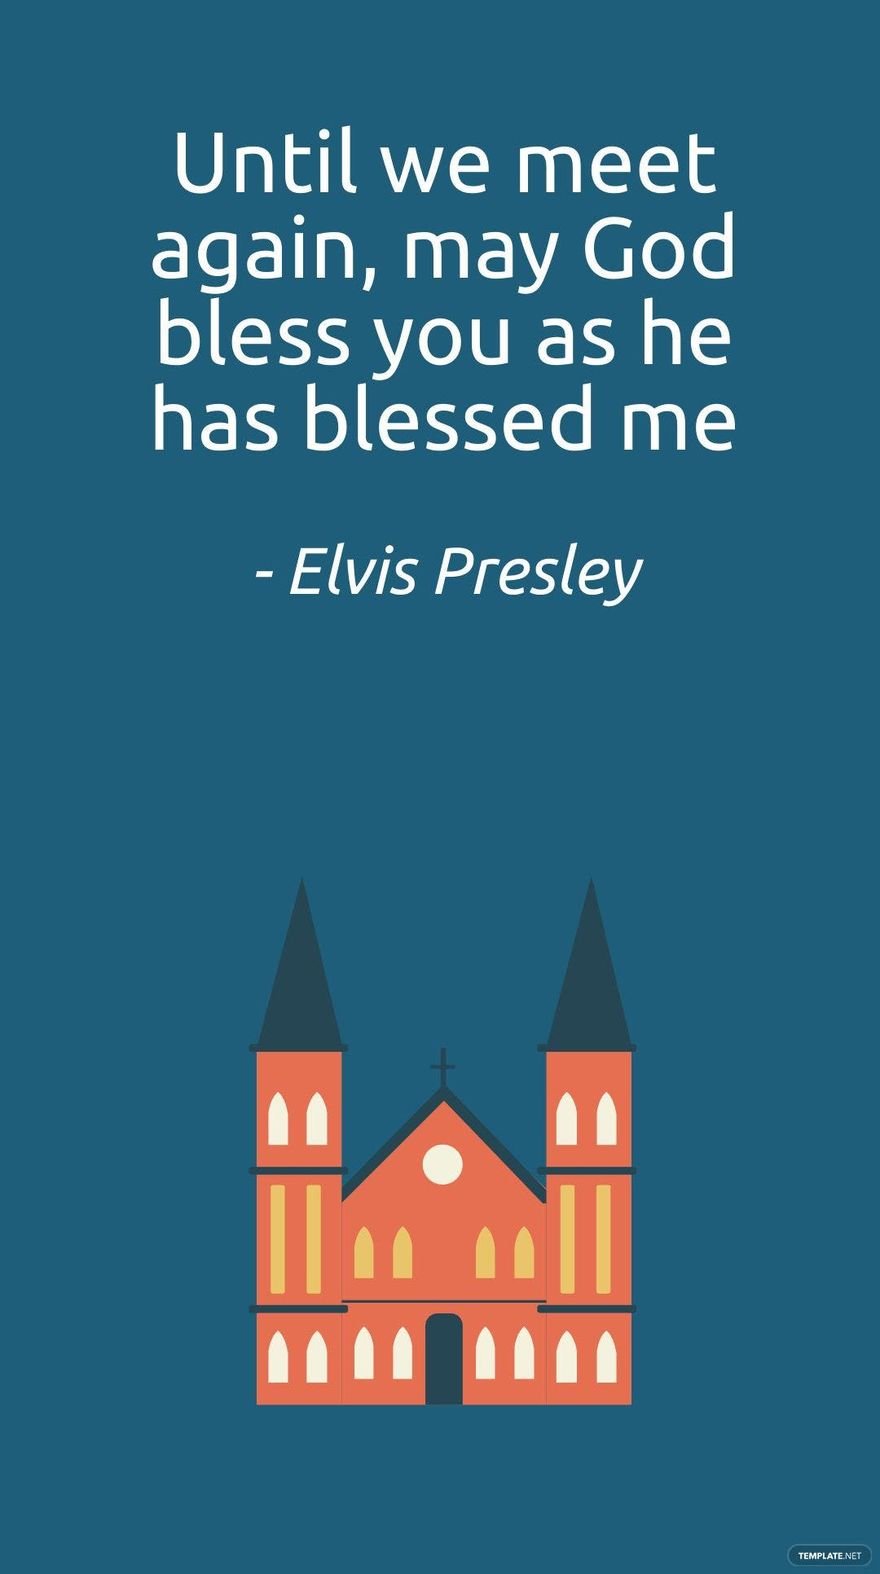 Elvis Presley - Until we meet again, may God bless you as he has blessed me